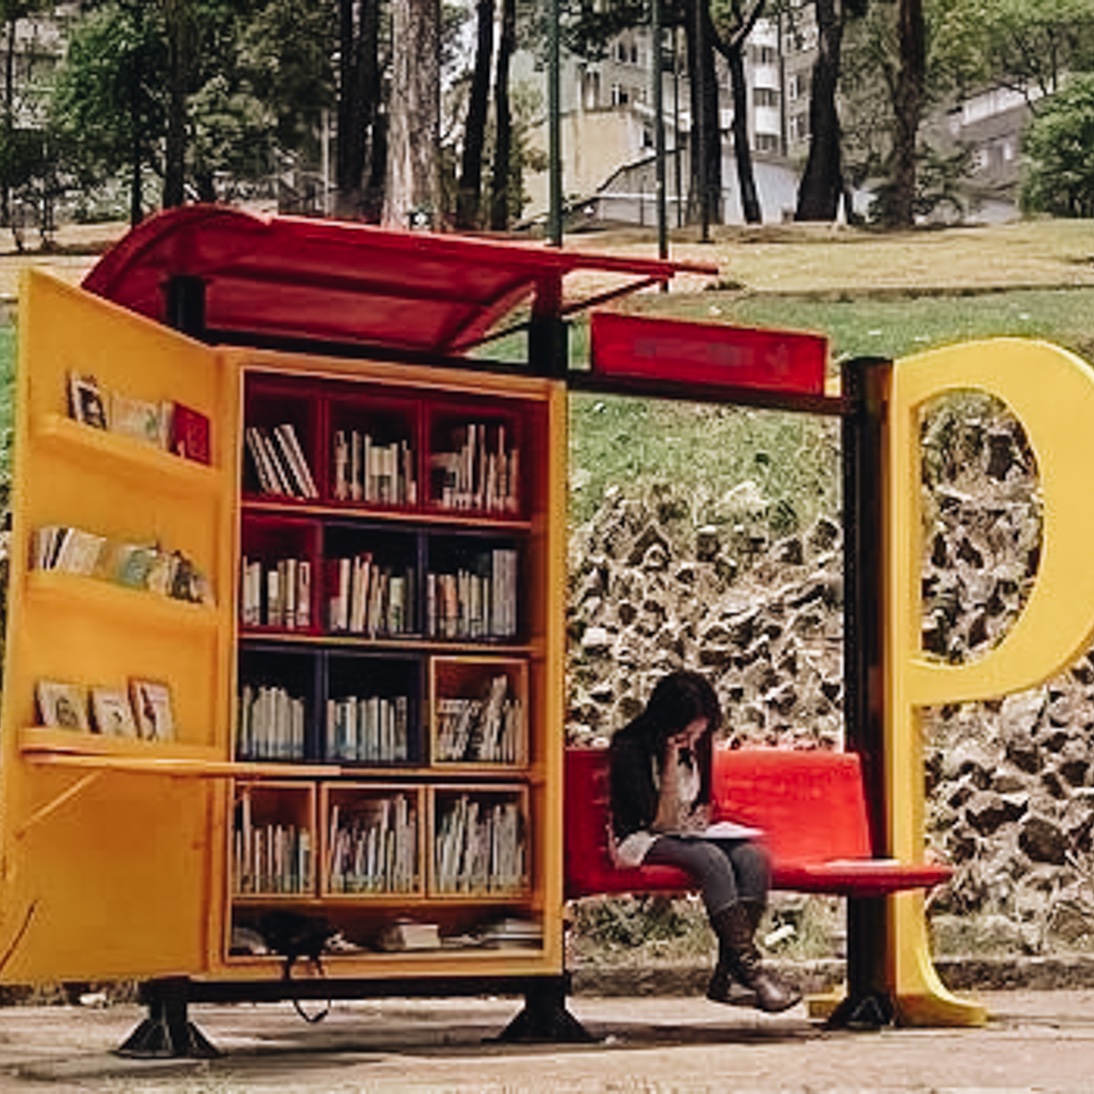 4. Bus stop library in Bogotá, Colombia Providing access to books for those patiently awaiting public transport.